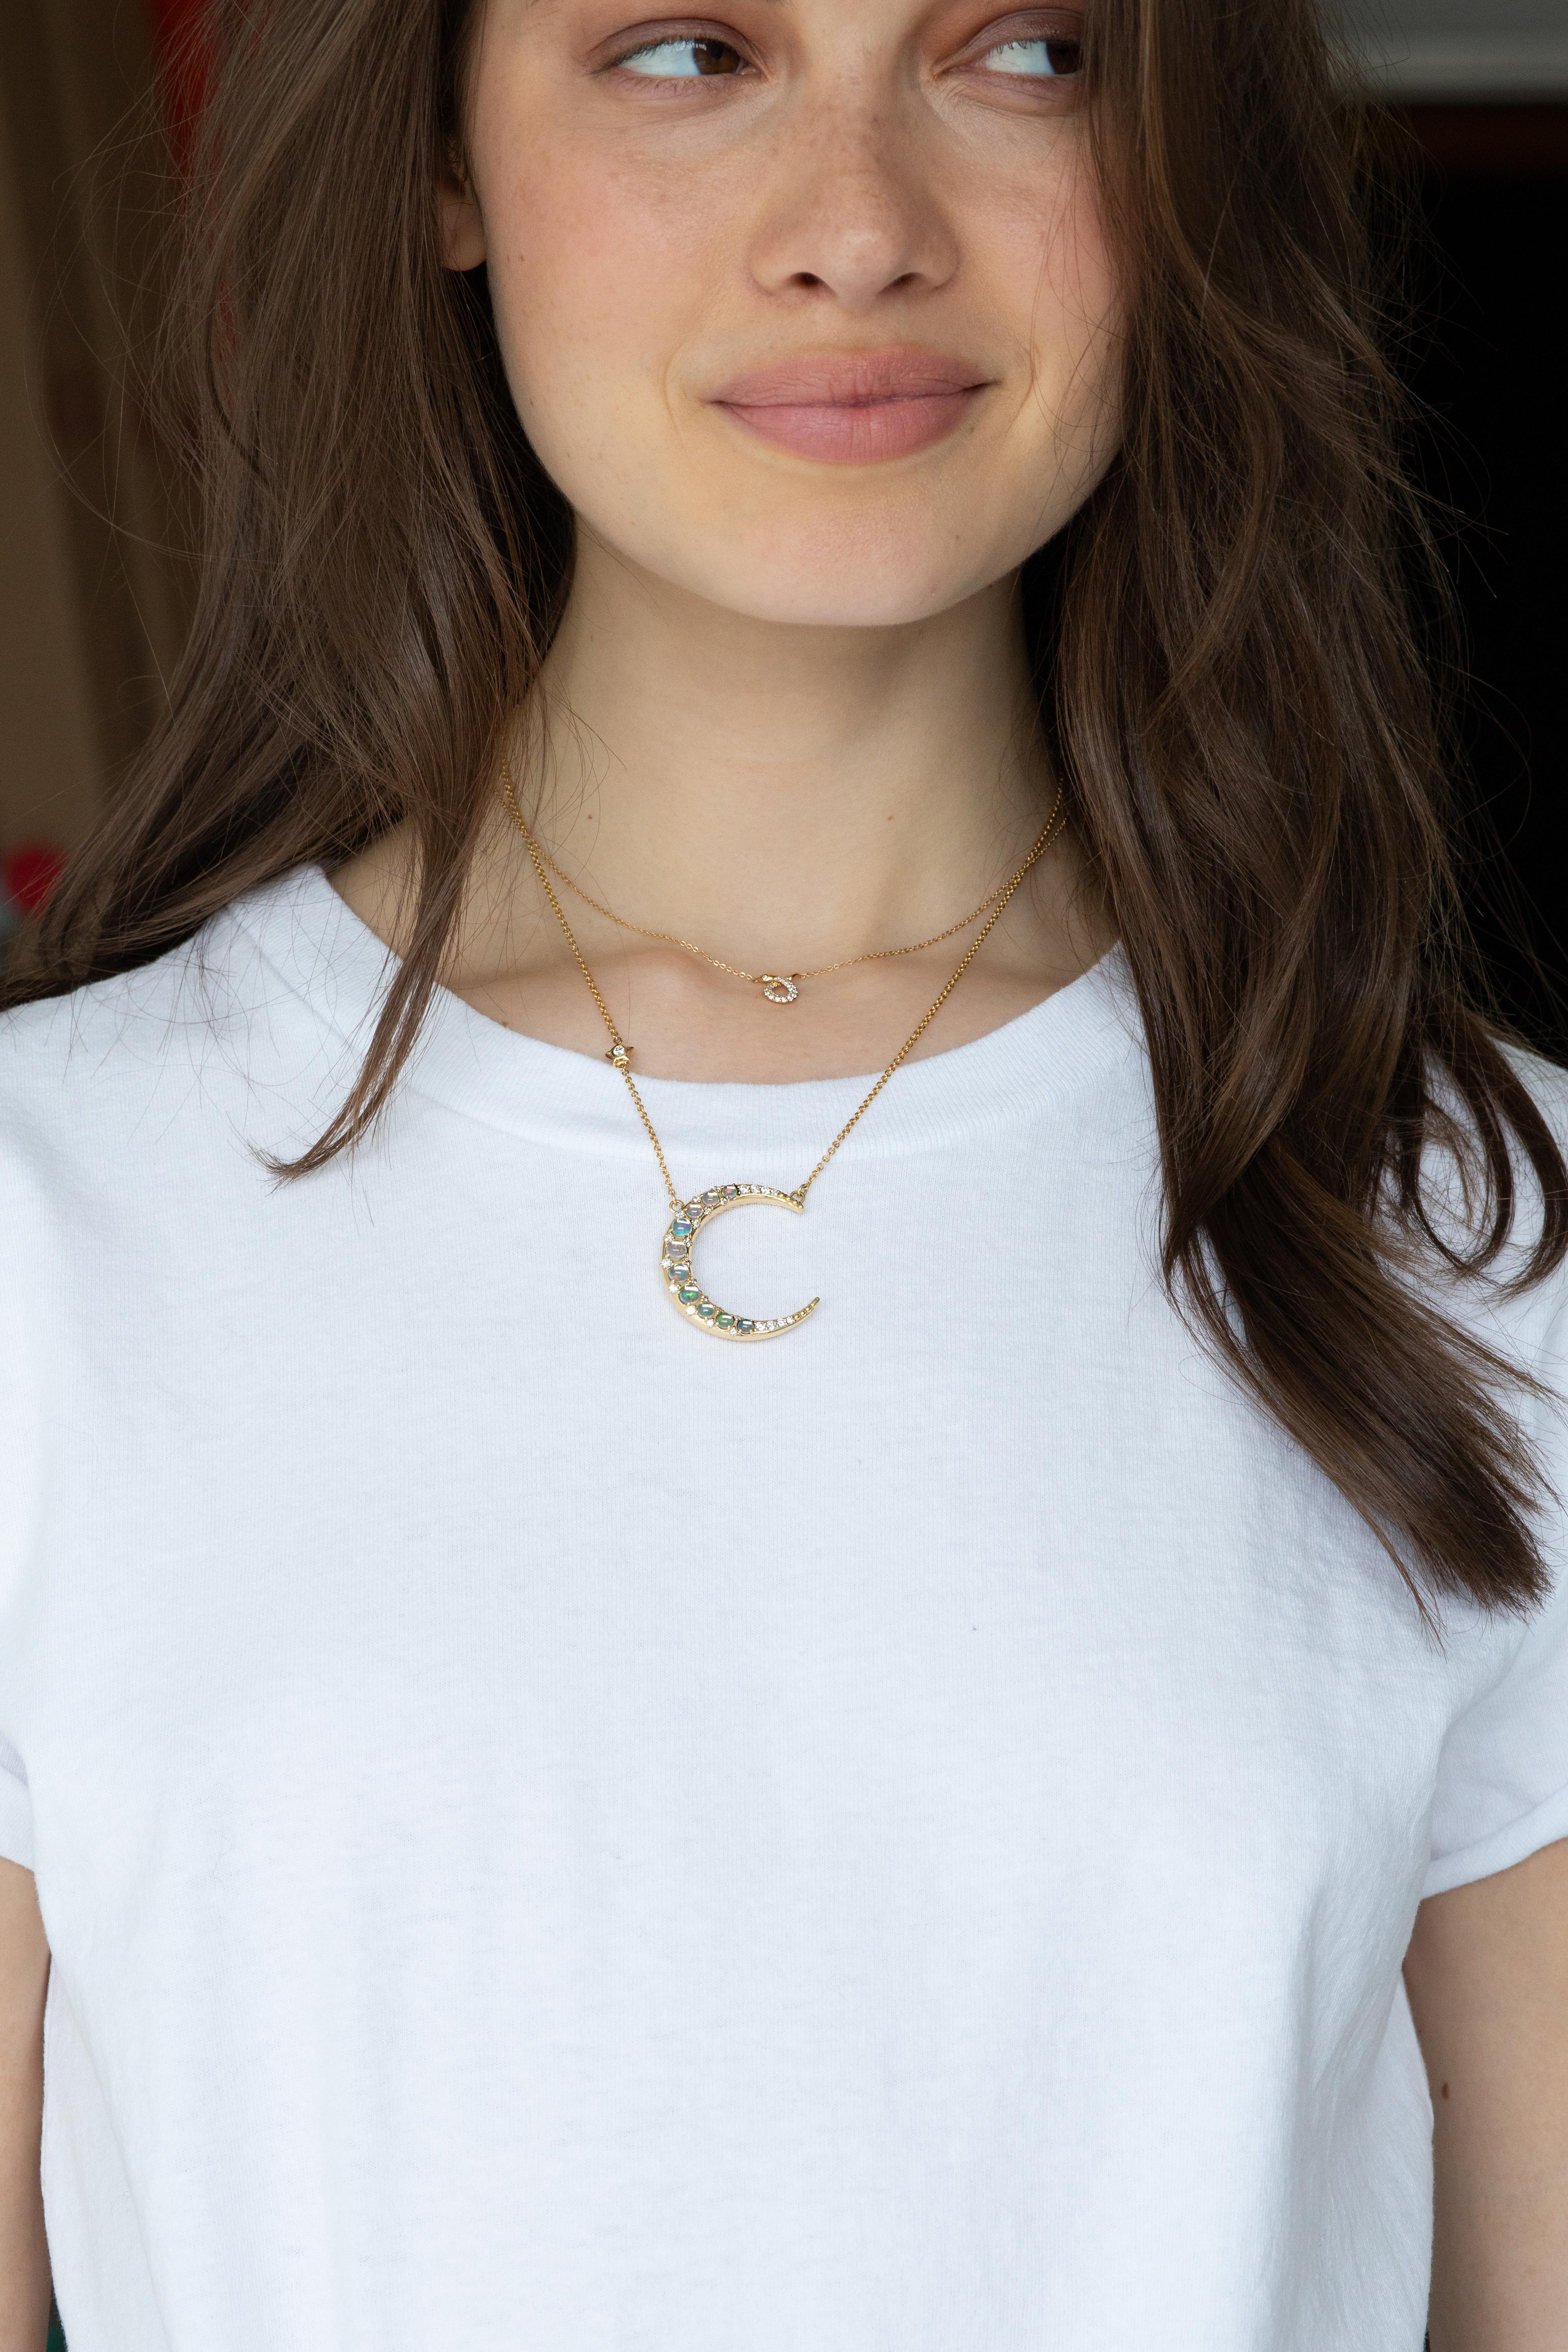 From the Sun, Moon and Stars collection, this Monica Rich Kosann 18K Yellow Gold charm necklace inspires the mystical quality of the crescent moon, featuring water opal cabochons and white diamond accents.
It is presented on an 18” cable chain with